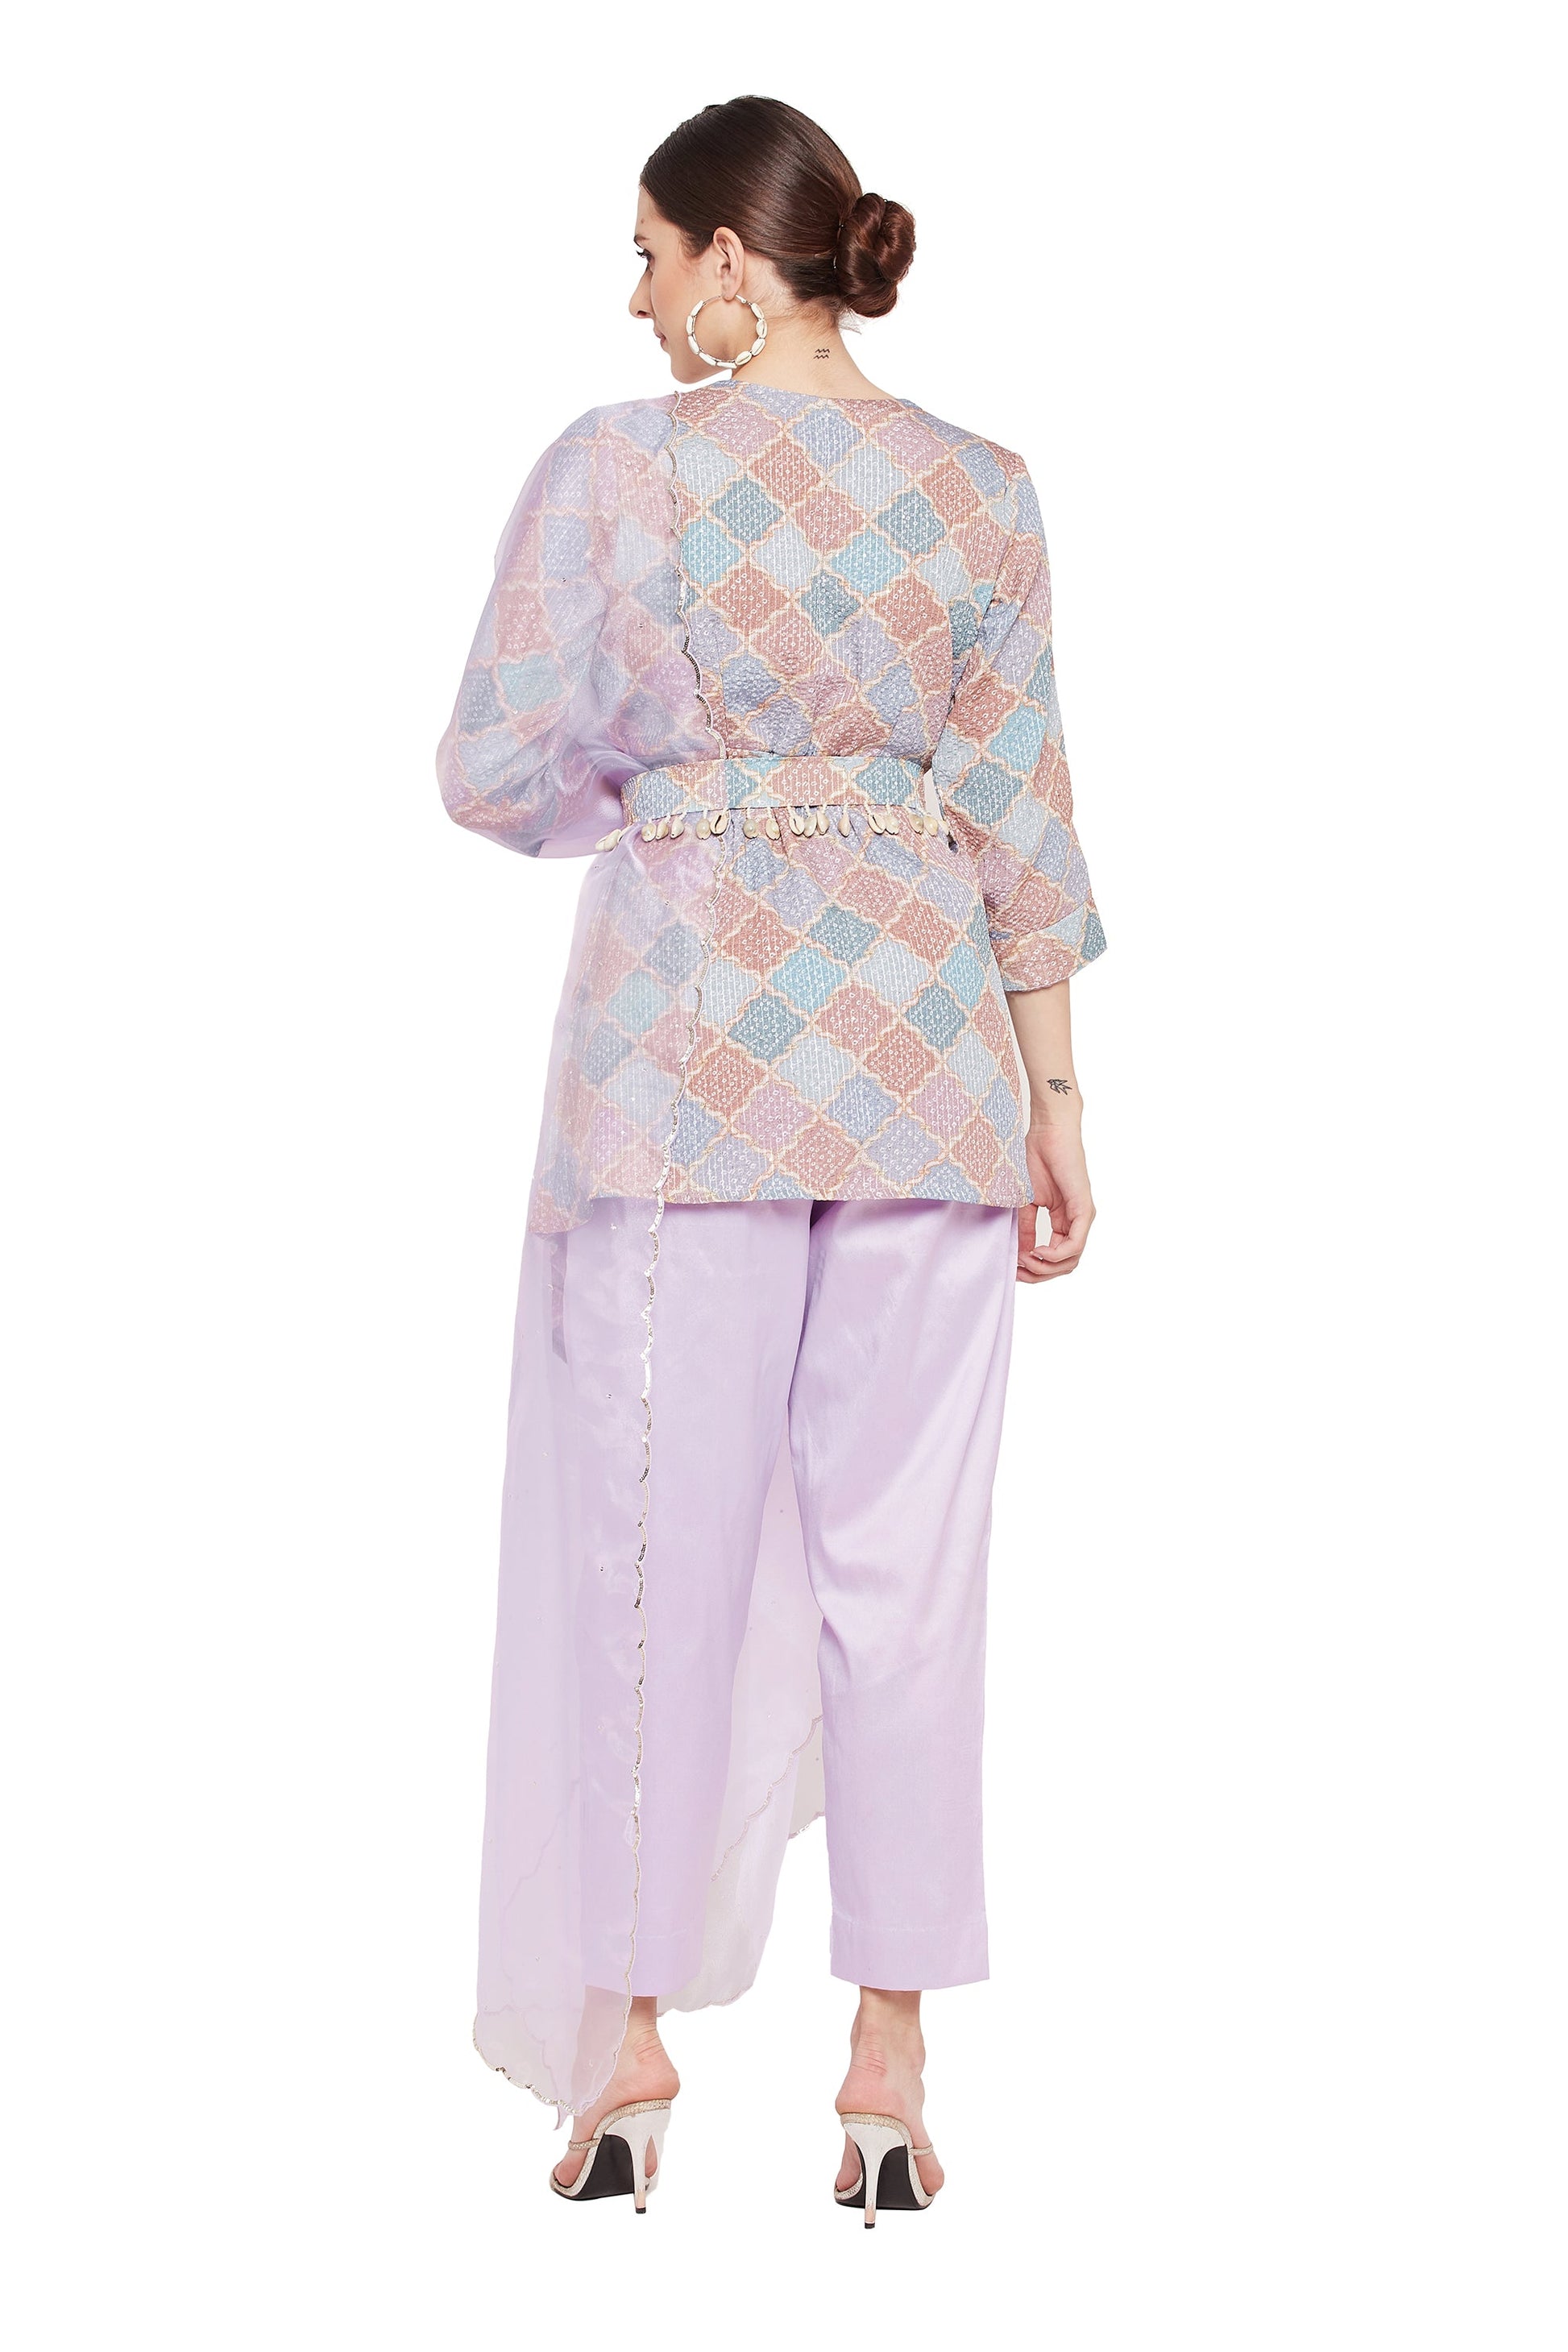 Women's Co-Ord Sets with Dupatta 3/4 Sleeves V-Neck Purple